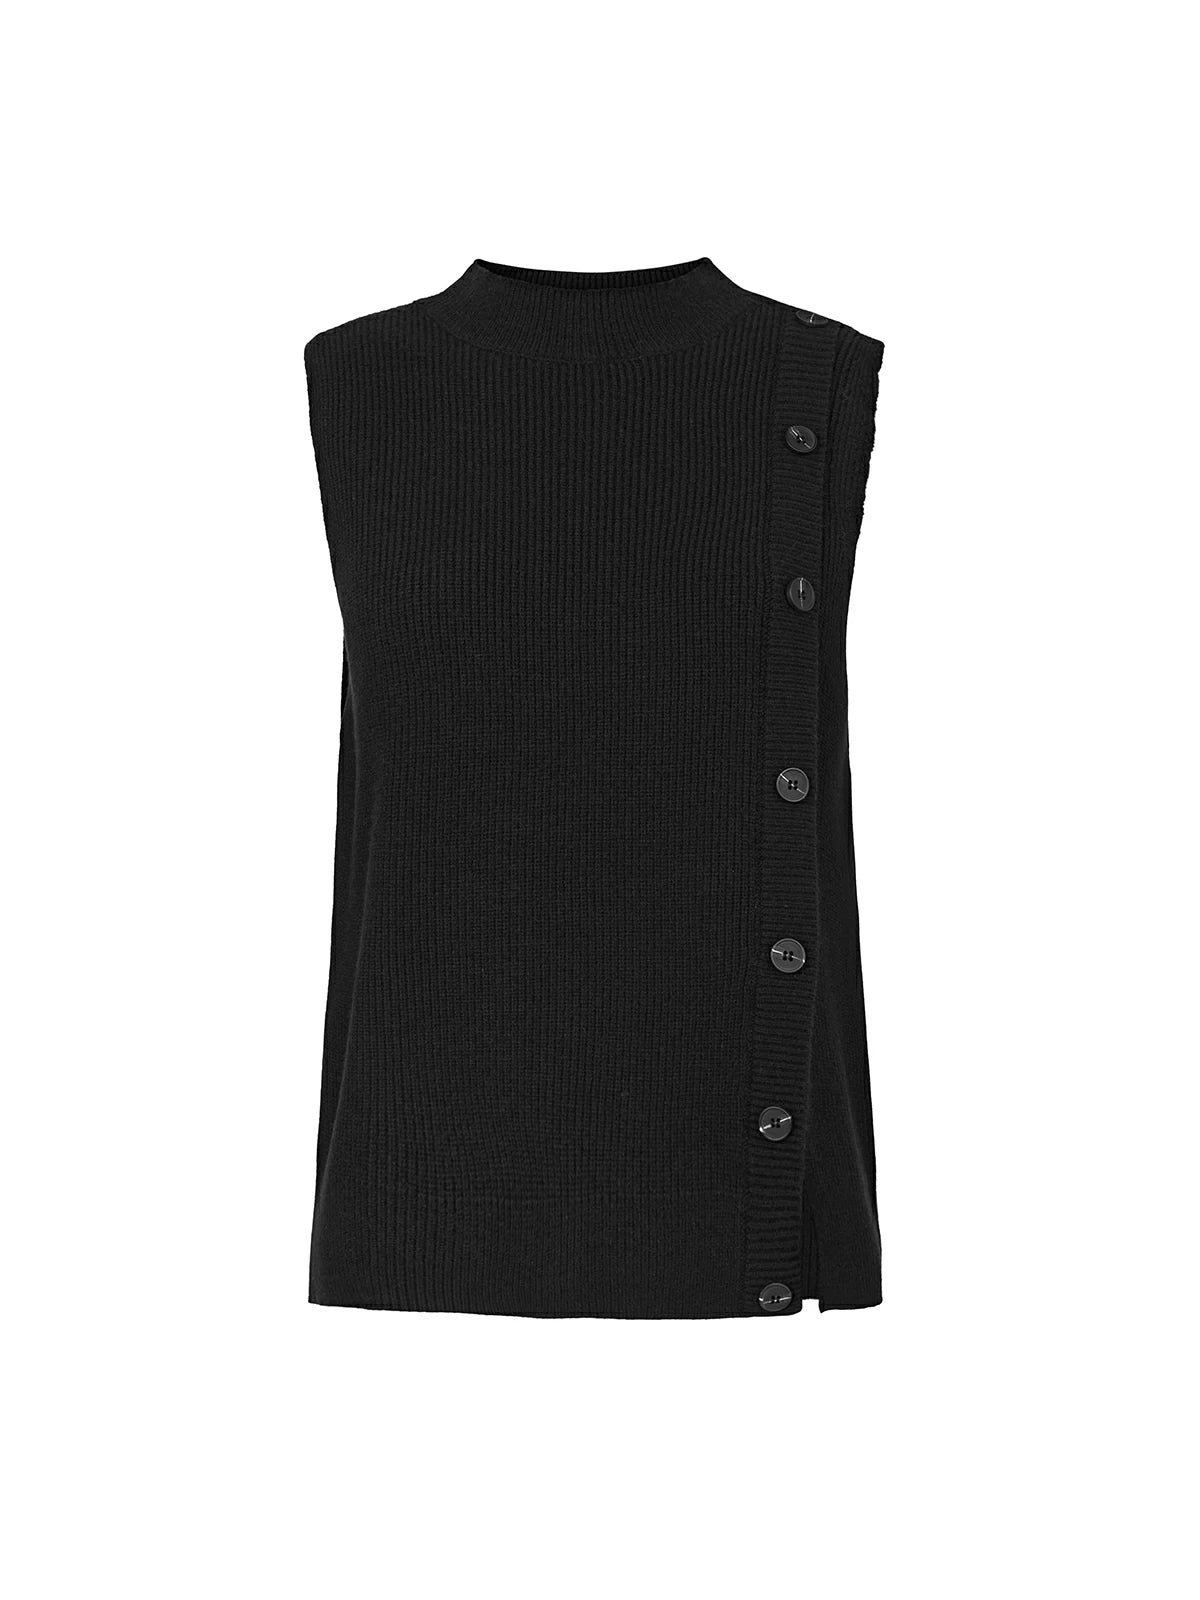 Casual chic women's vest as a fashionable accessory